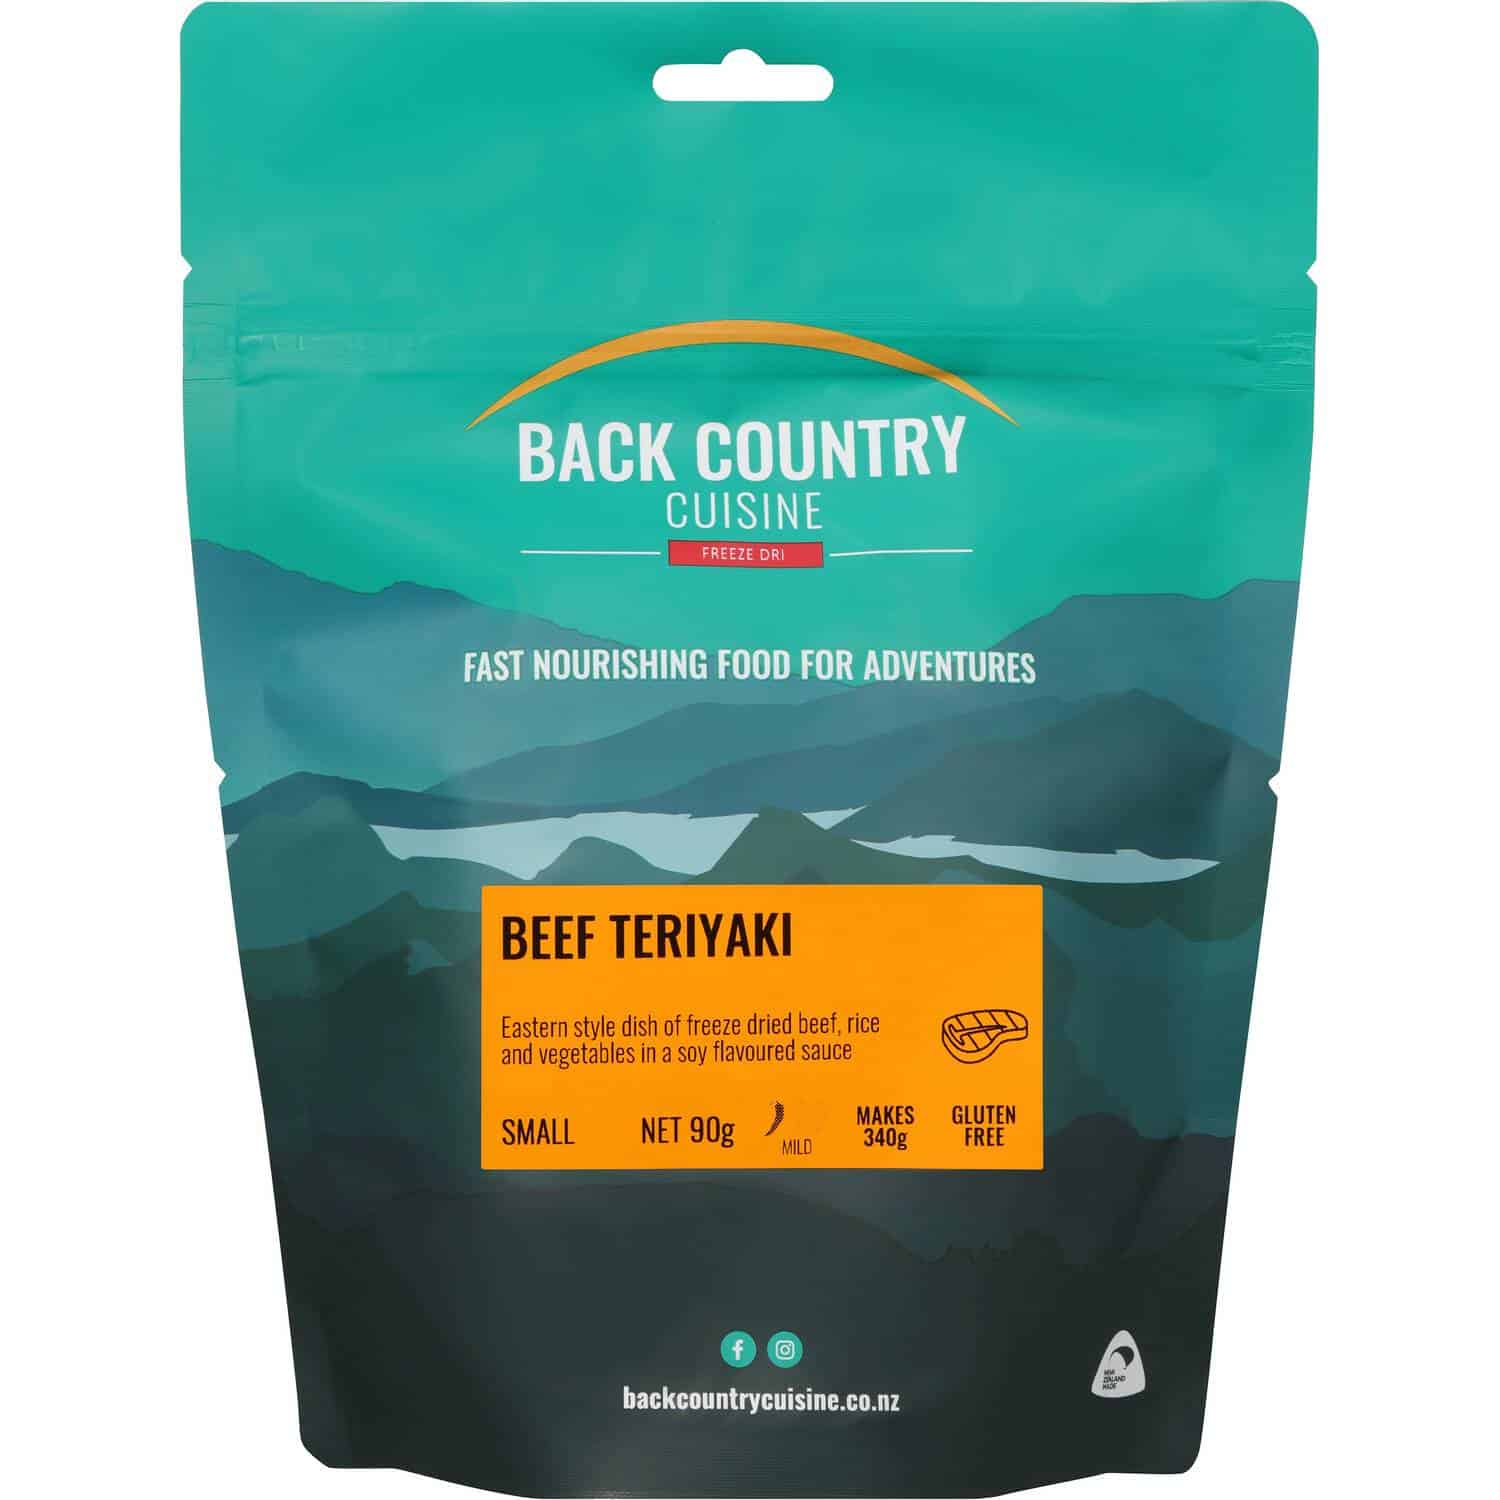 Back Country Cuisine Beef Teriyaki Small - Tramping Food and Accessories sold by Venture Outdoors NZ